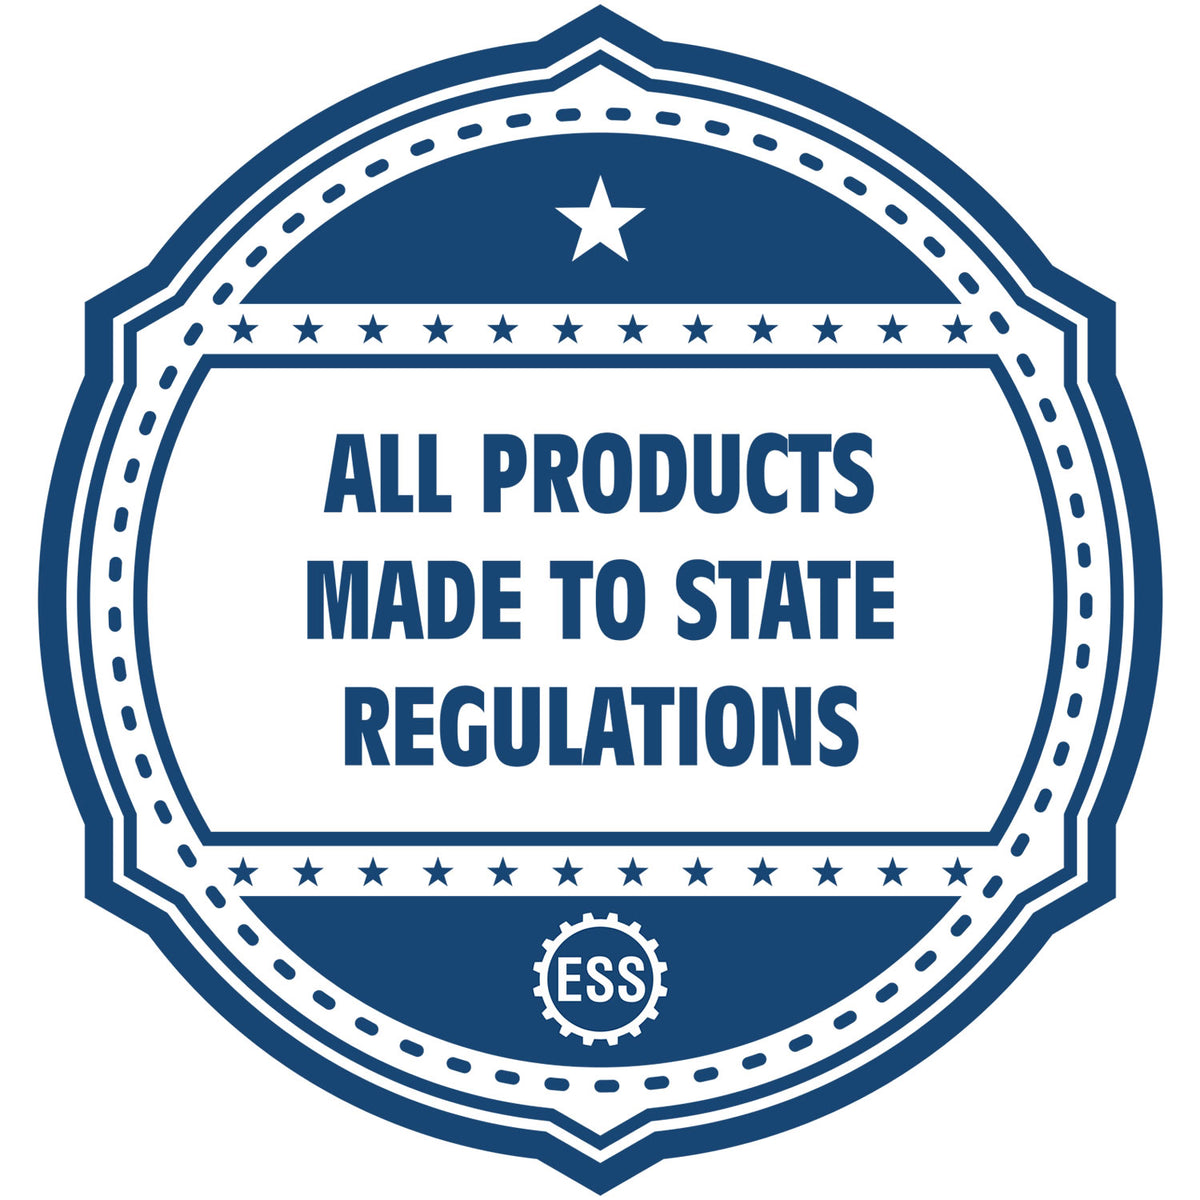 An icon or badge element for the Self-Inking Georgia PE Stamp showing that this product is made in compliance with state regulations.